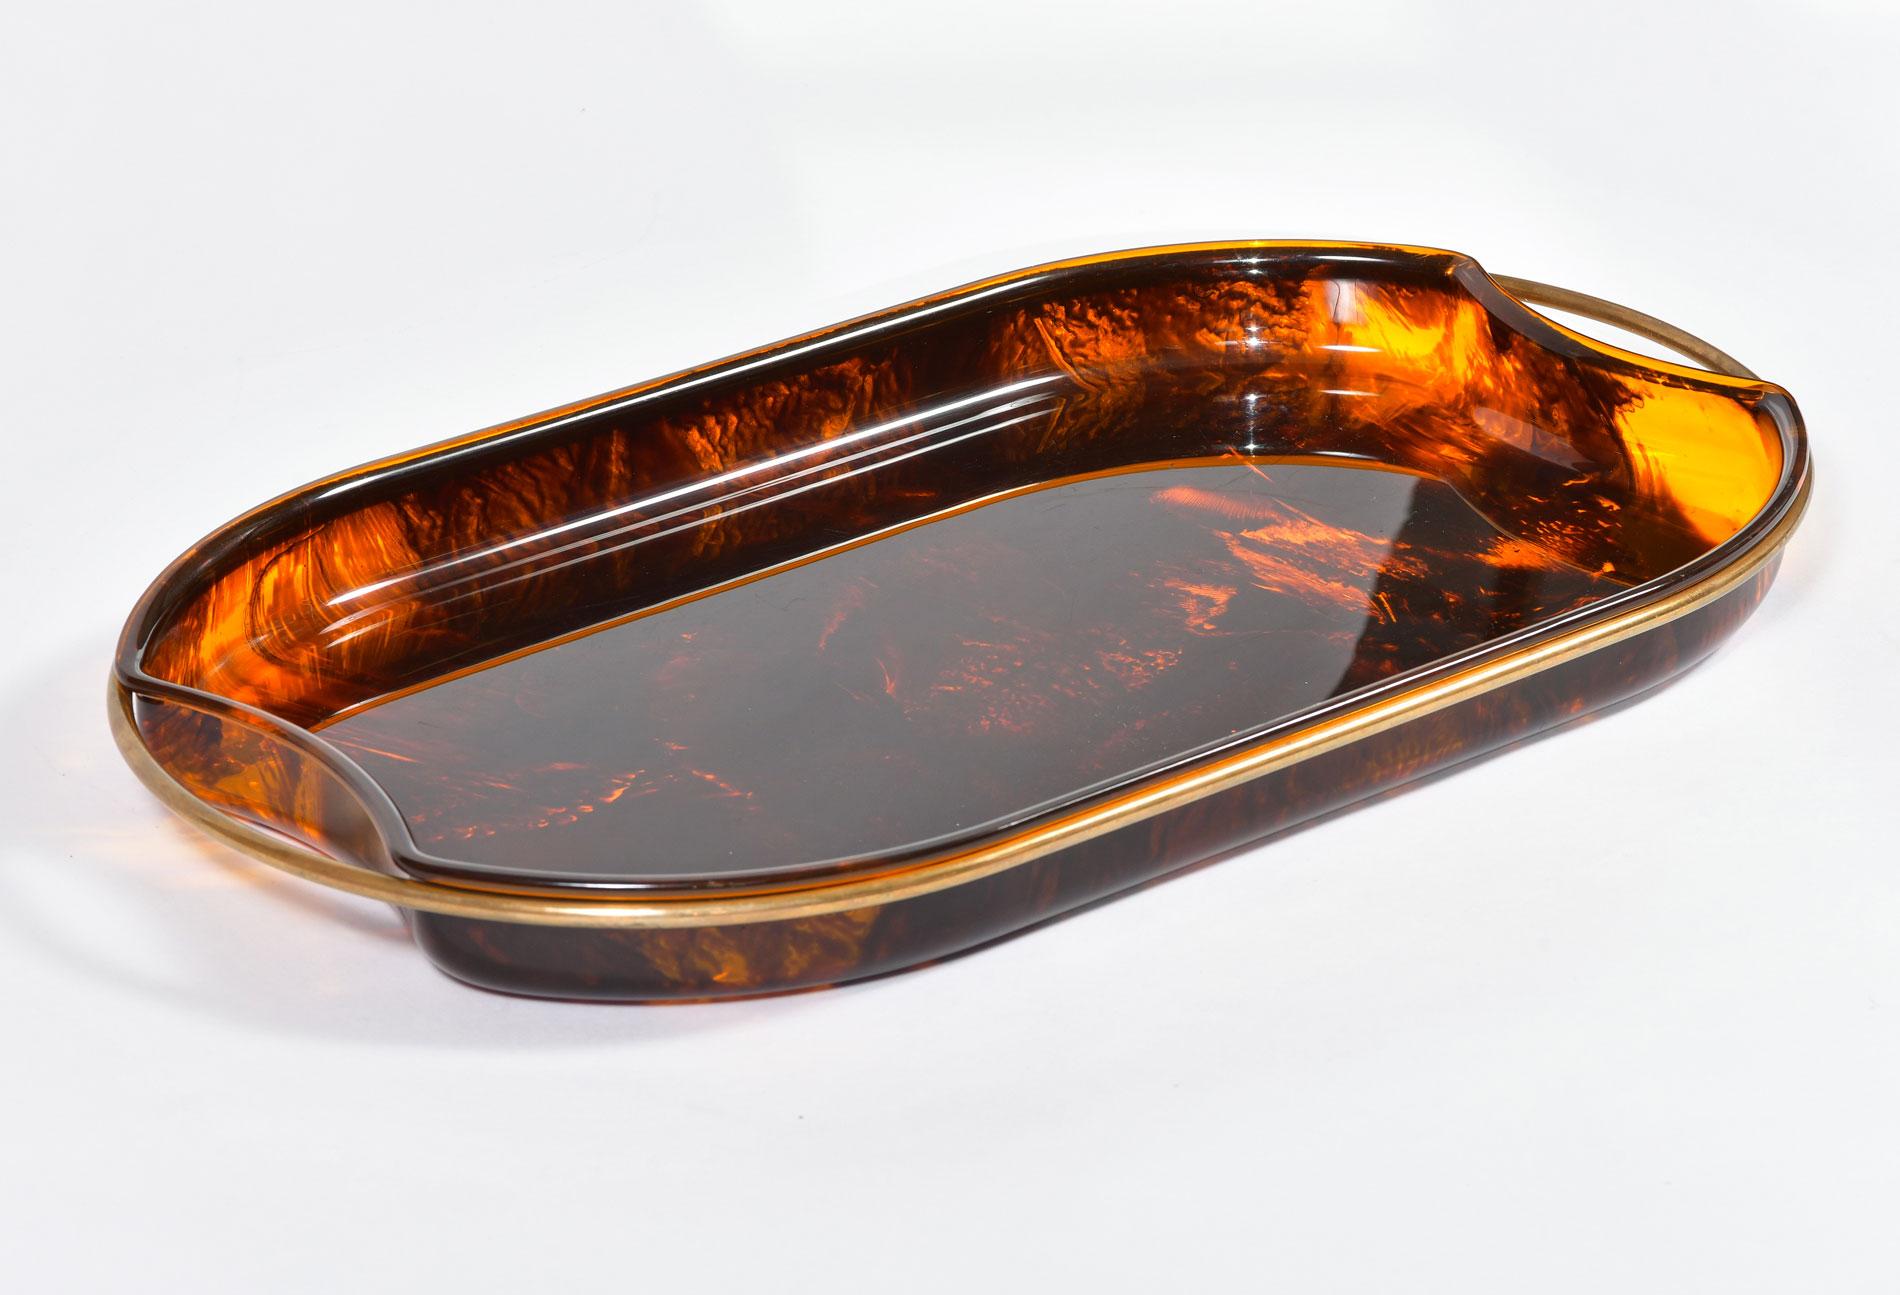 Substantial oval shaped faux tortoise shell tray with simple brass handles.